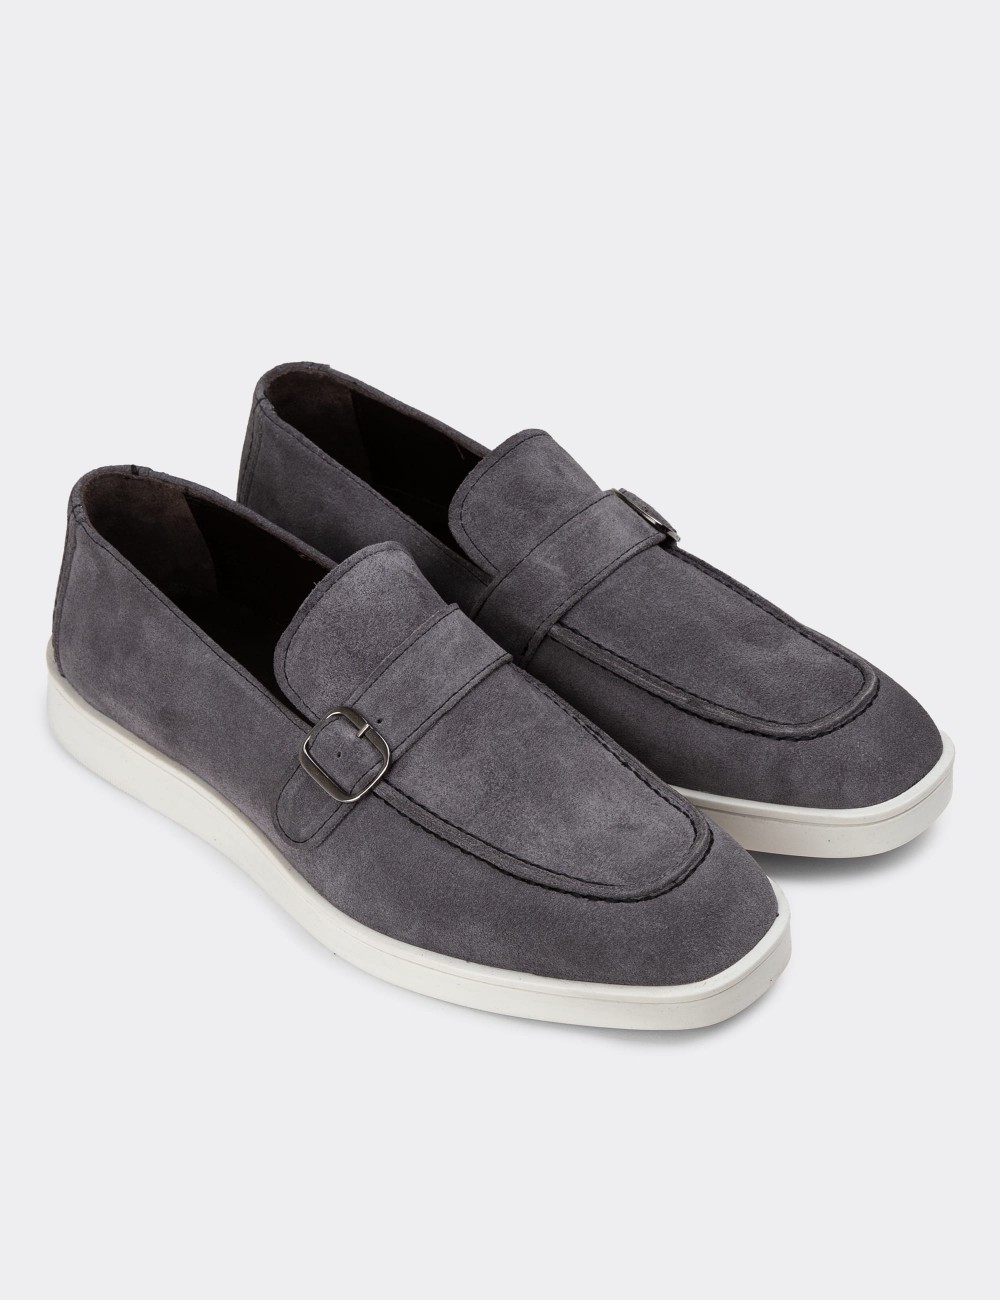 Gray Suede Monk Strap Leather Loafers - 01959MGRIC01